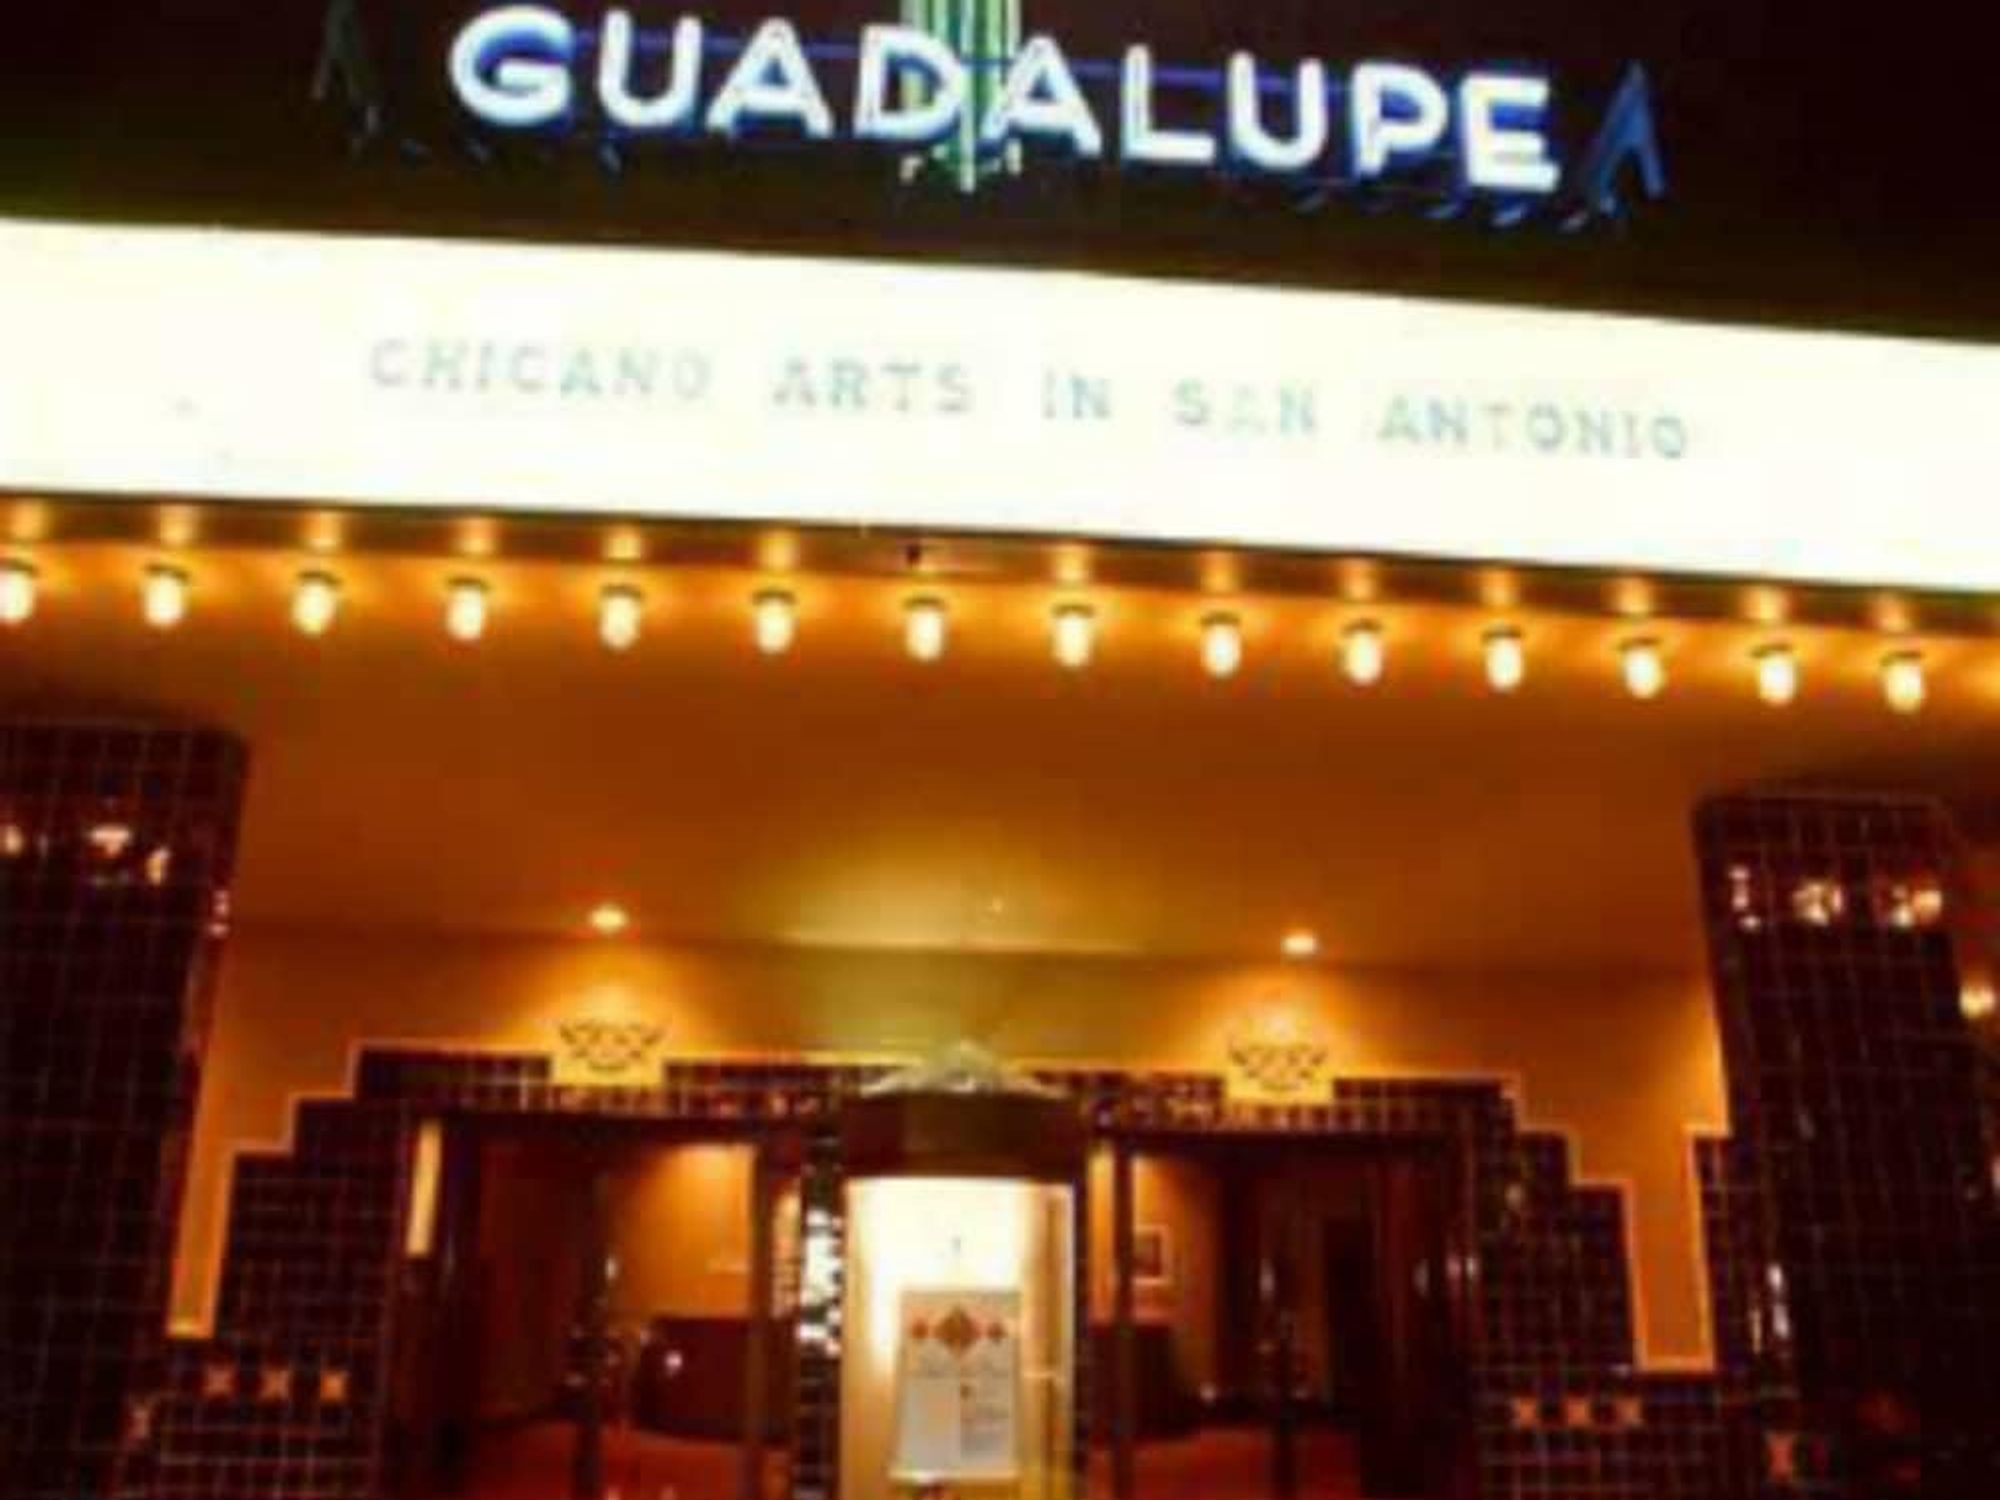 The Guadalupe Cultural Arts Center presents 75th Anniversary Celebration of the Historic Guadalupe Theater